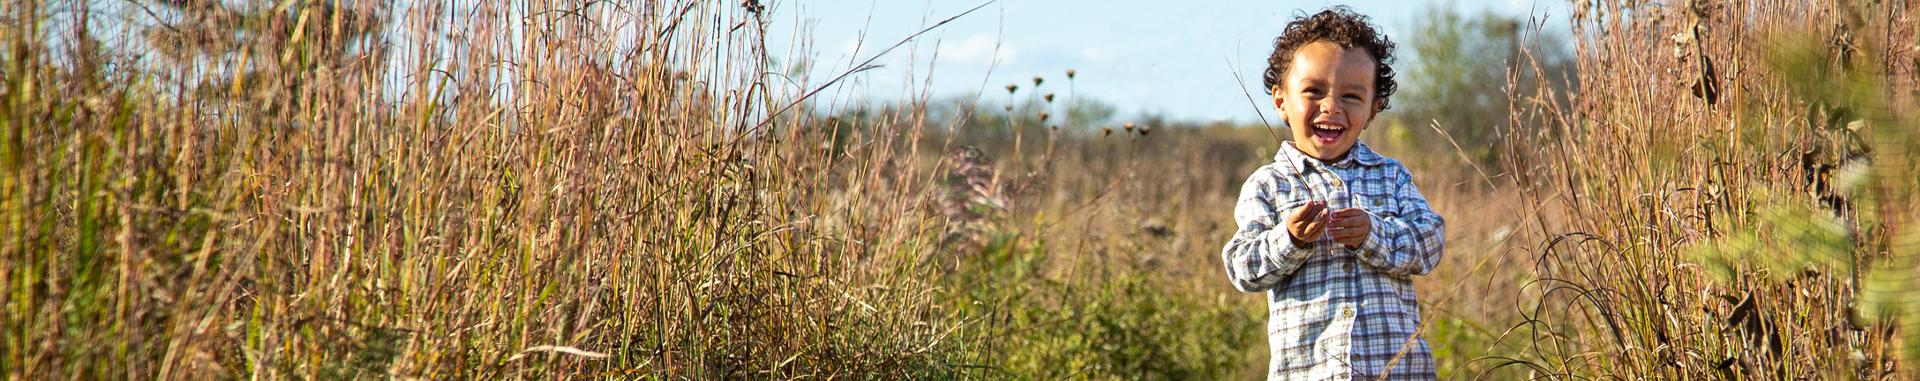 Panoramic photo of smiling young boy in a field located within Mississippi Valley Conservancy land